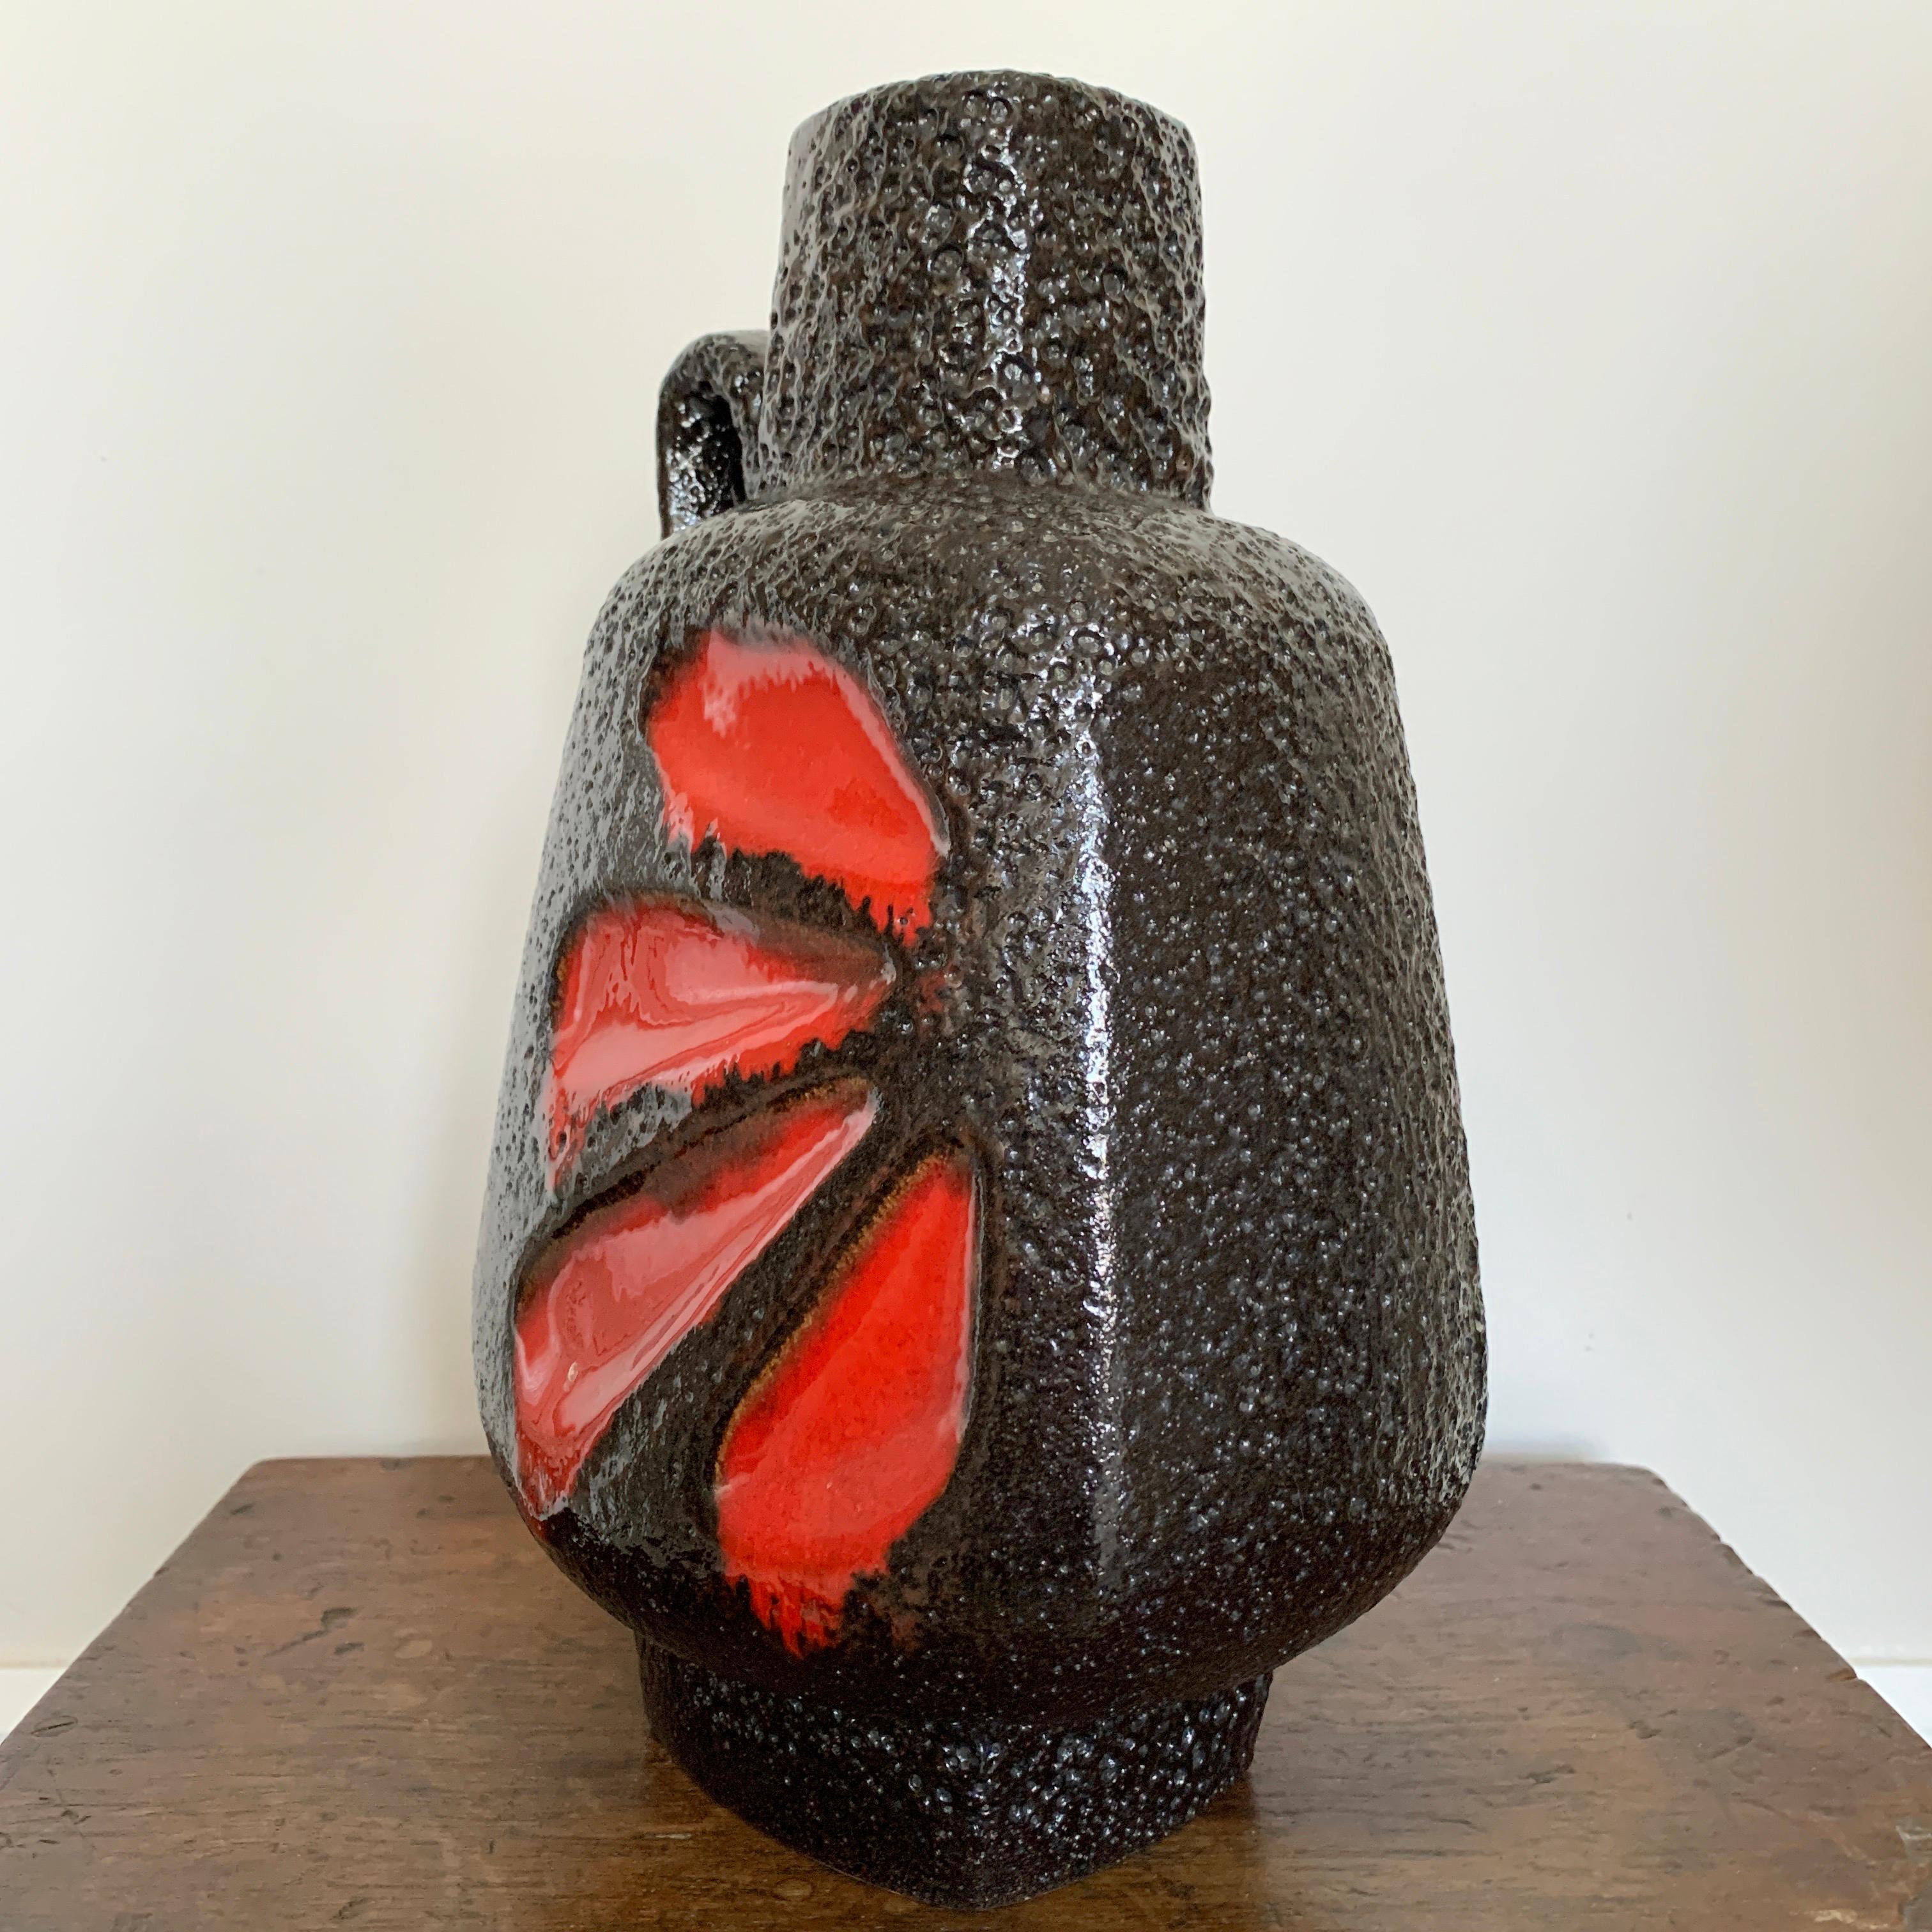 E S Keramik fat lava vase
1921-1974
Good sized vase with Classic red patl shapes to the front and back
Great condition 

Founded in Rheinbach in 1921 by Josef Emons & Söhne. The company was split in 1948 (due to financial difficulties resulting